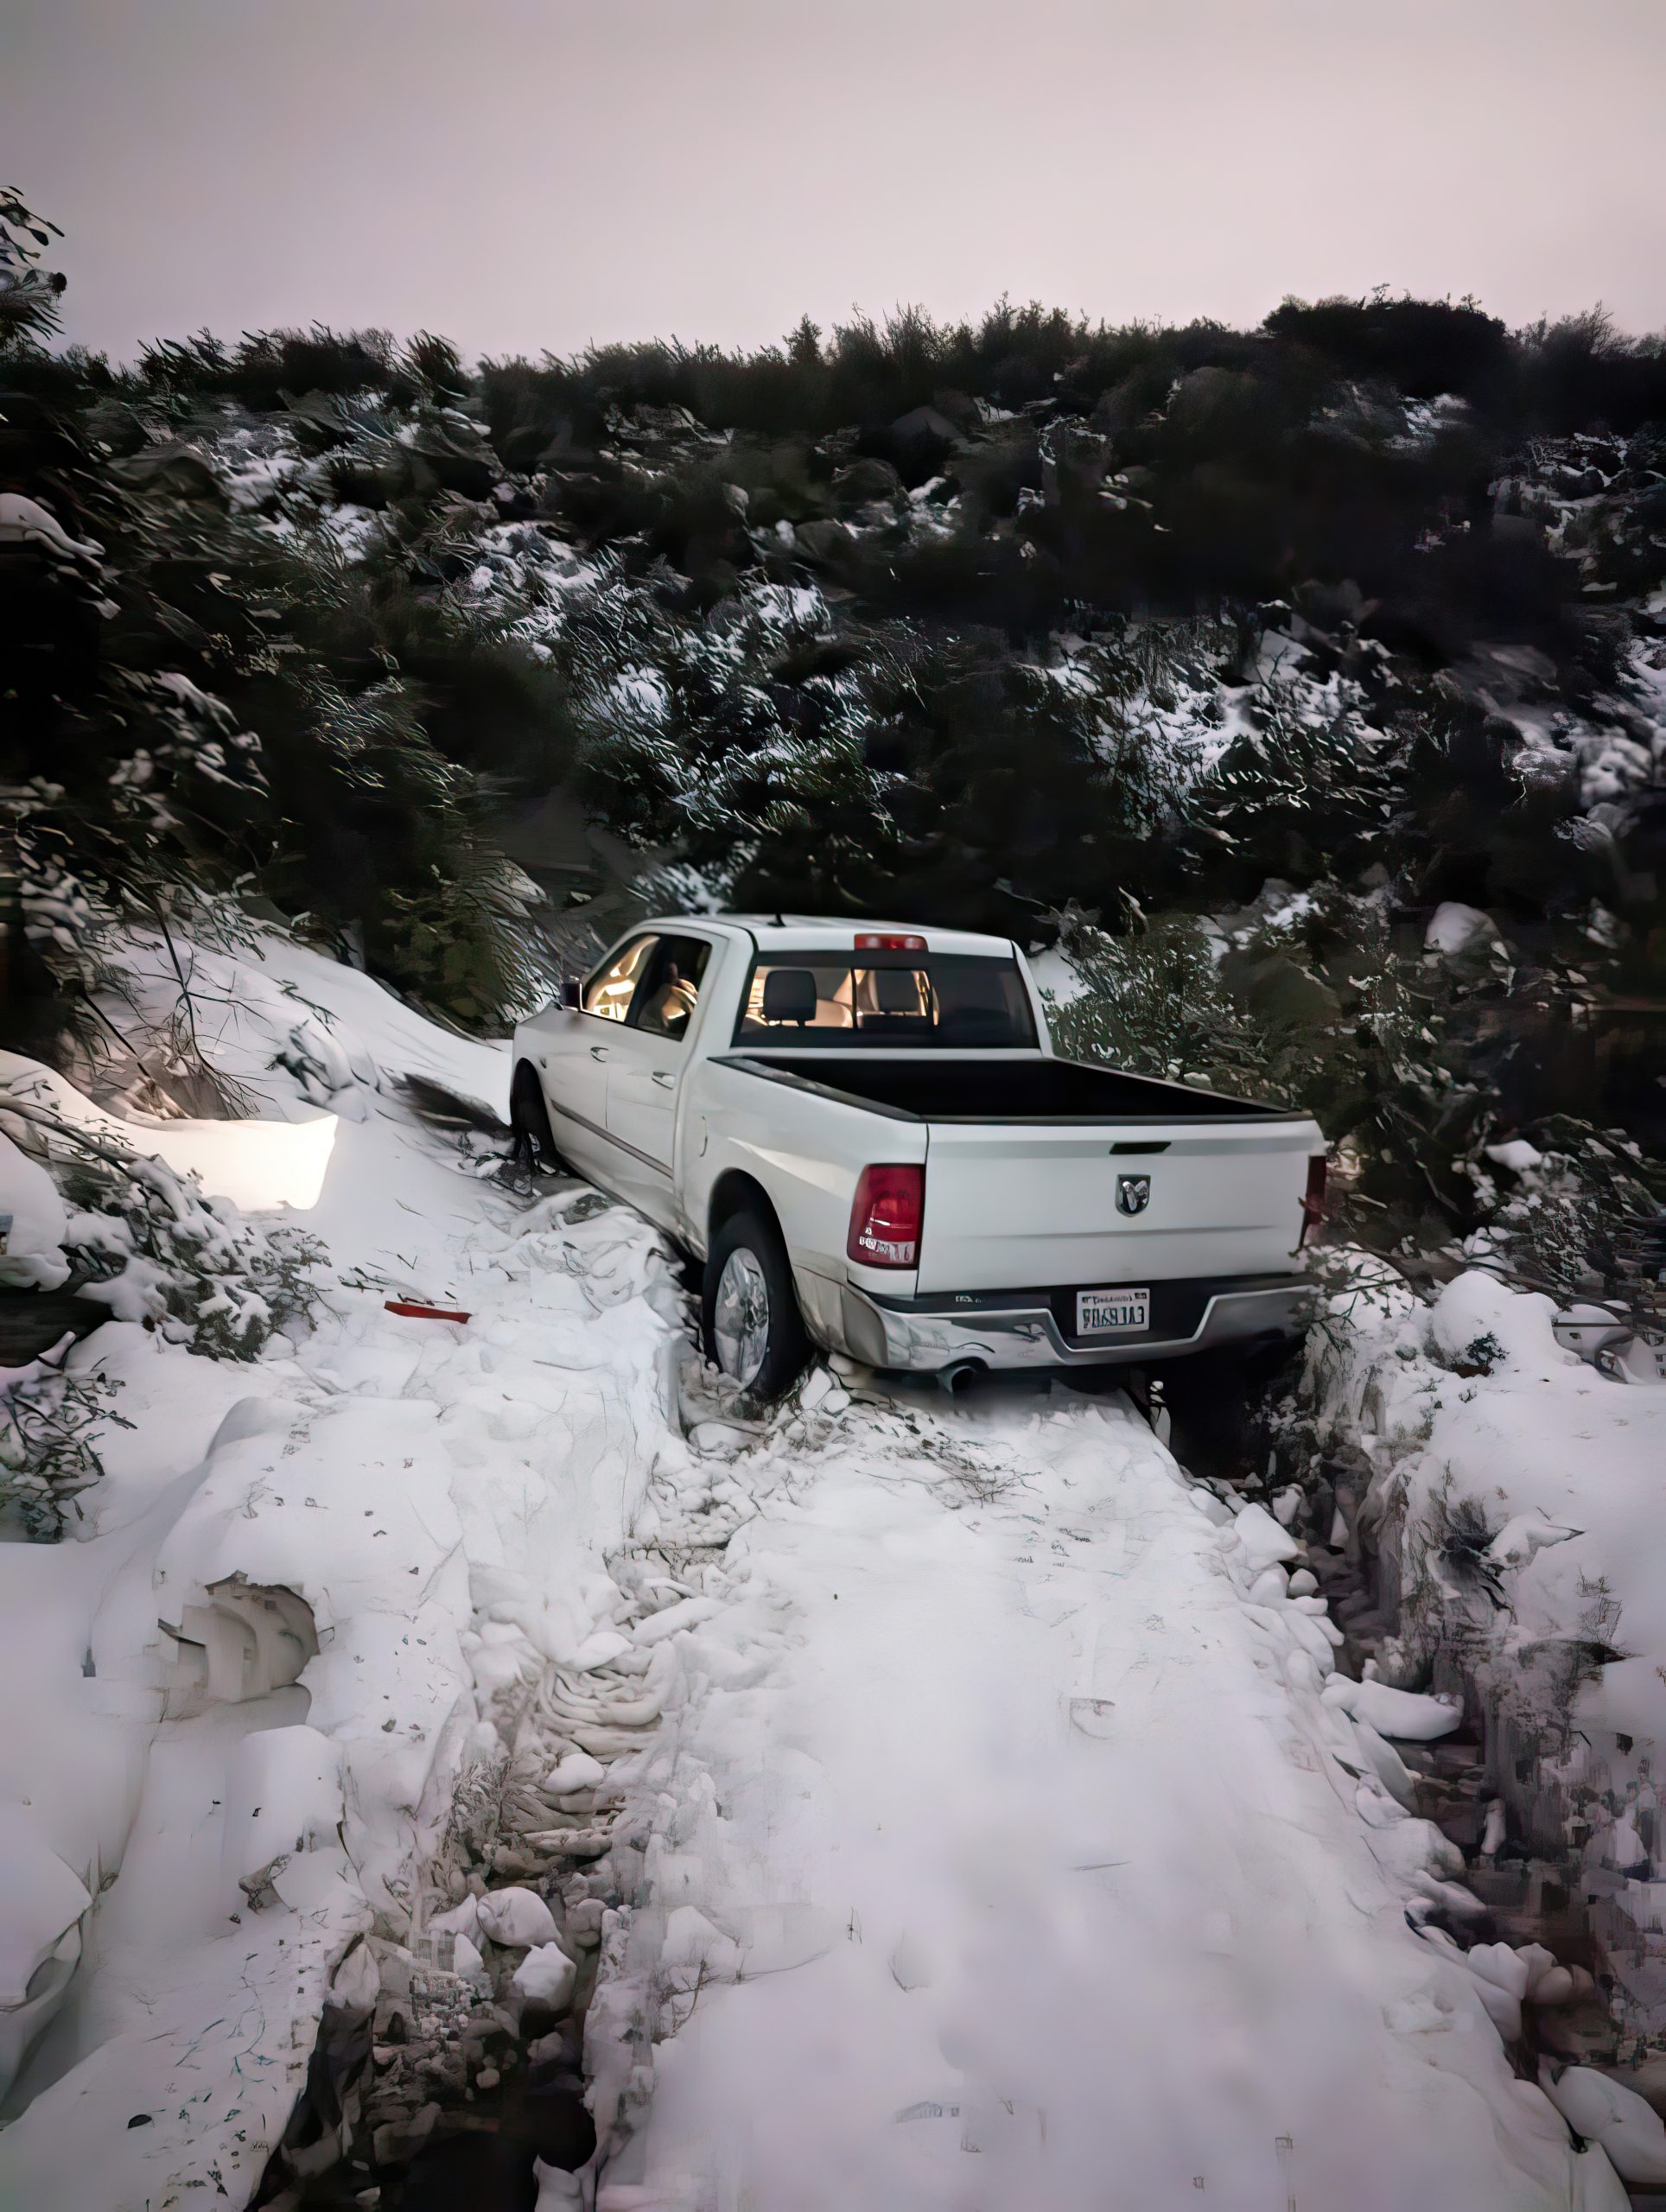 ram 1500 stuck in snow needing an off-road recovery off-road recovery california